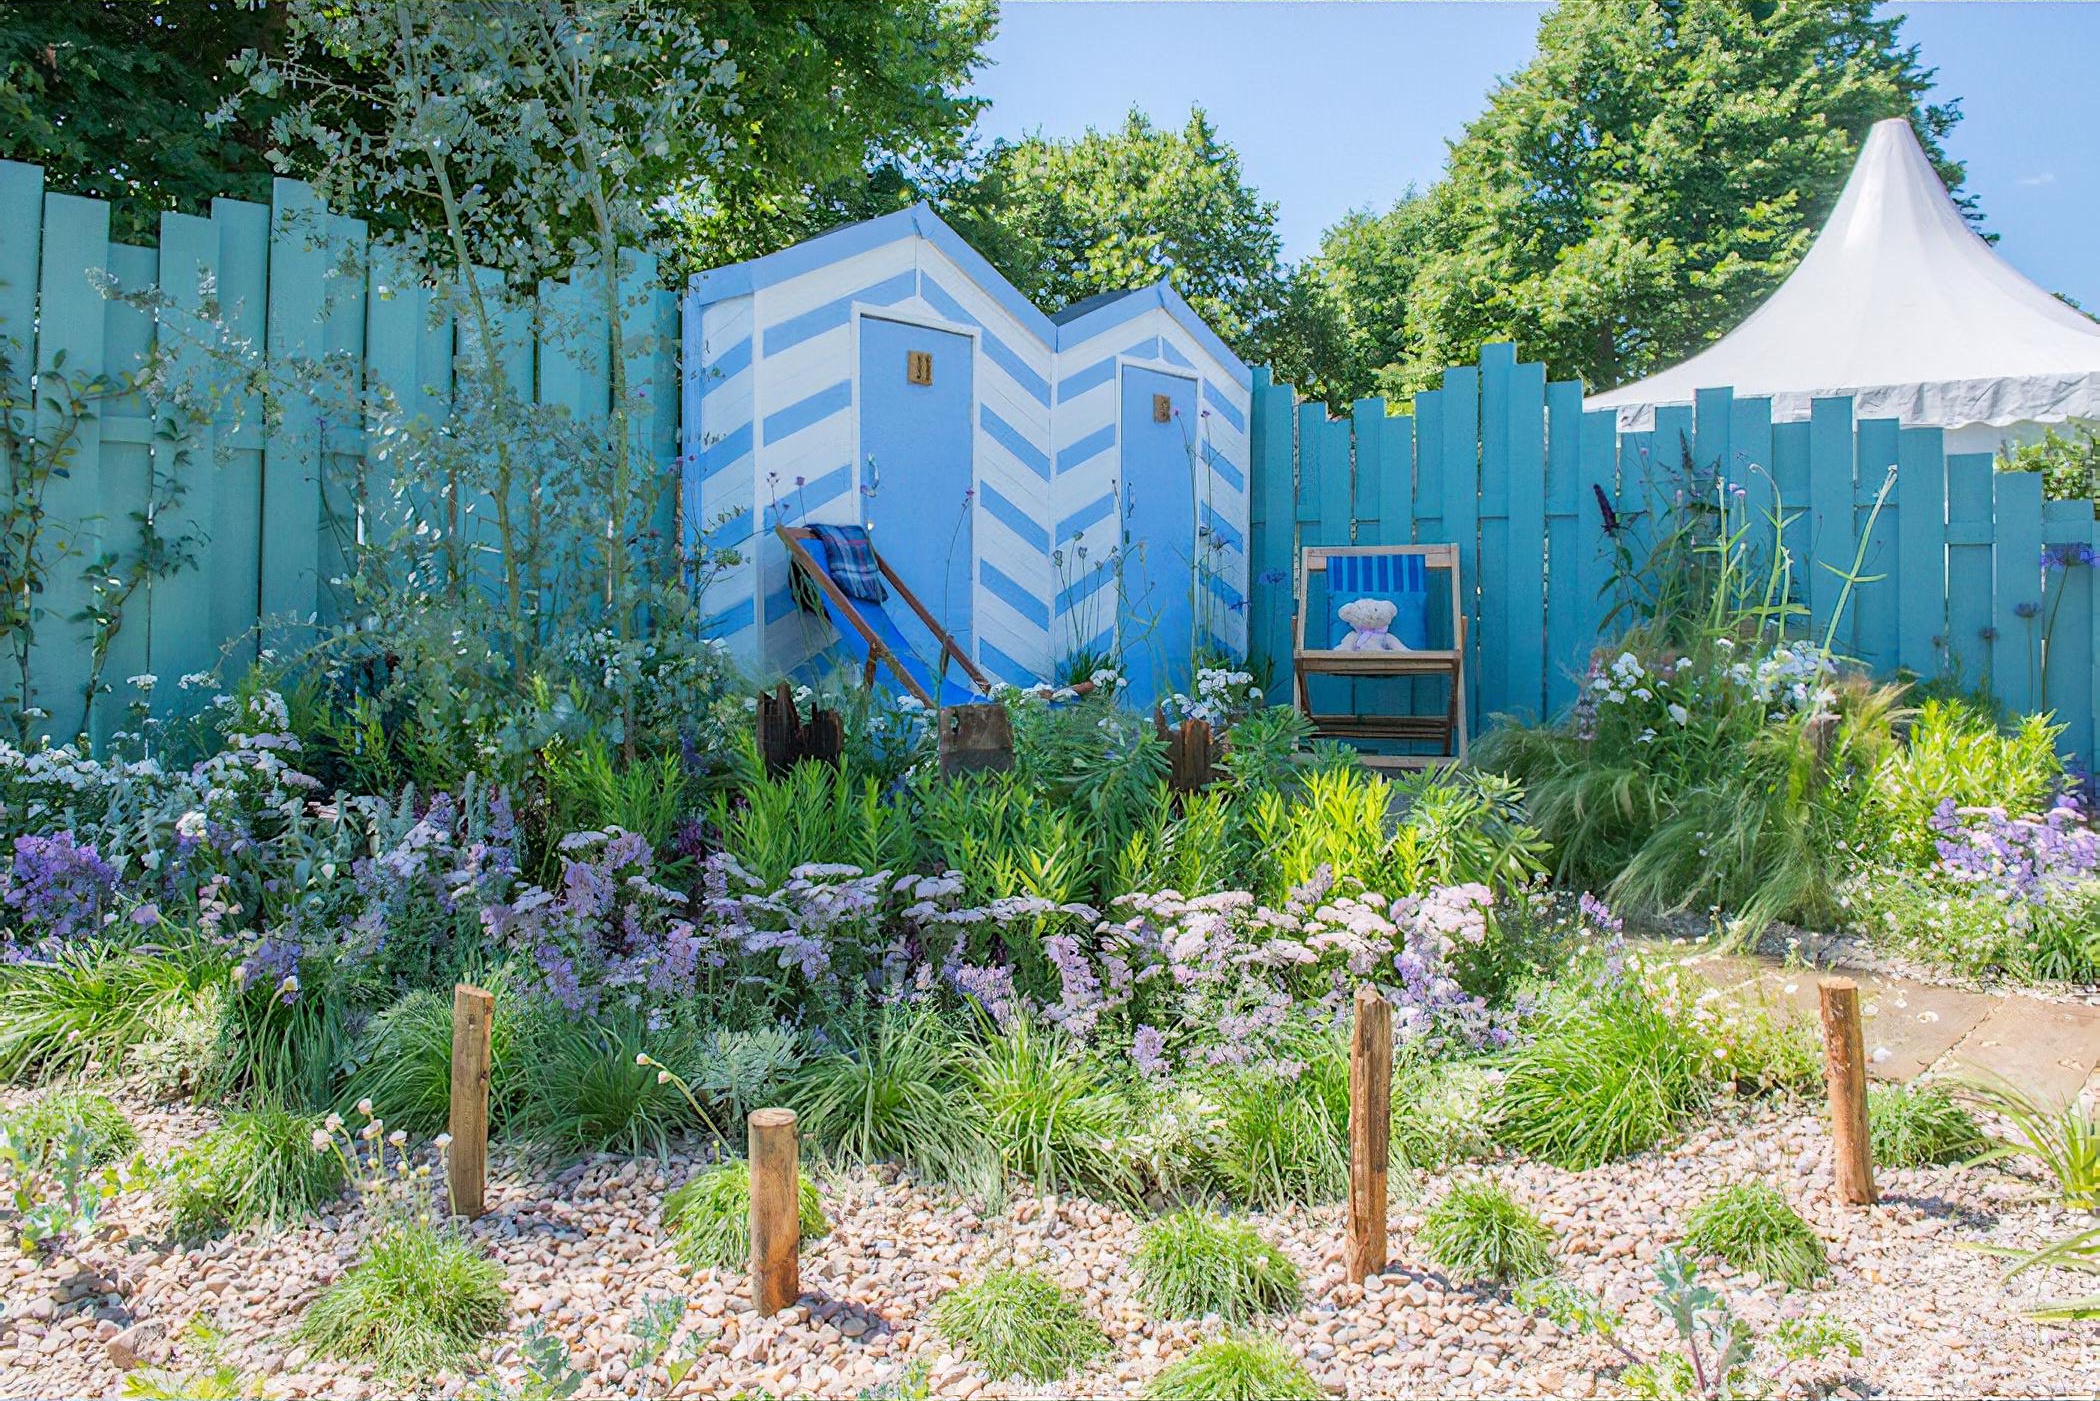 By garden designers James Callicott and Tony Wagstaff. Inspired by the coastline of Southend-on-Sea, the pier and the surrounding beach, the Southend Council ‘By The Sea’ garden offers a peaceful idyll situated by the coast.